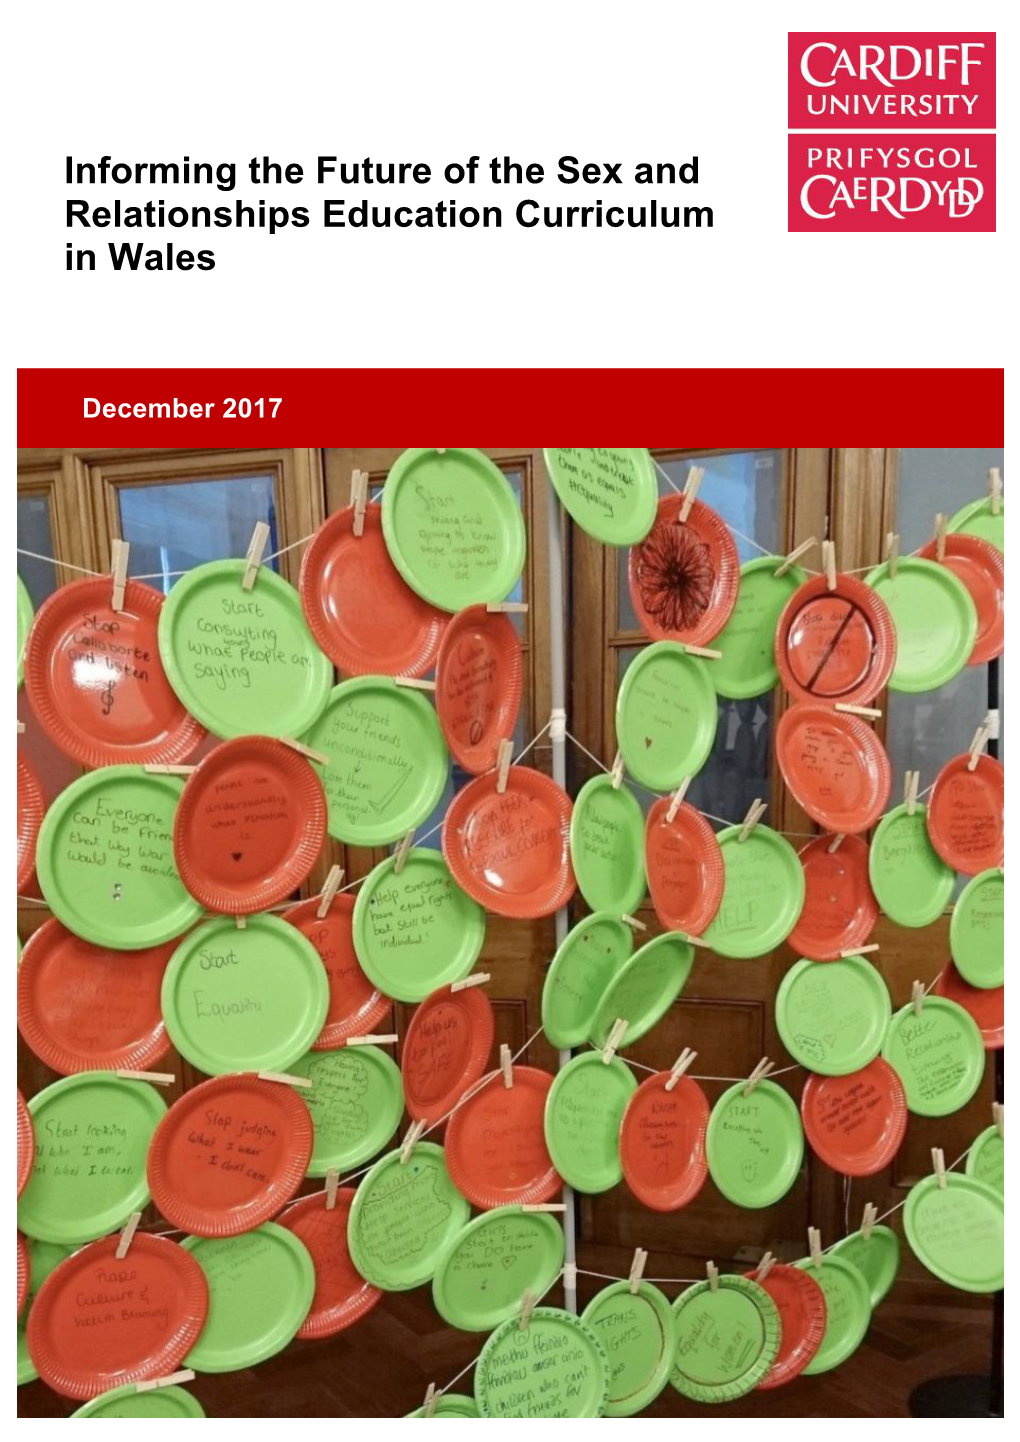 Informing the Future of the Sex and Relationships Education Curriculum in Wales